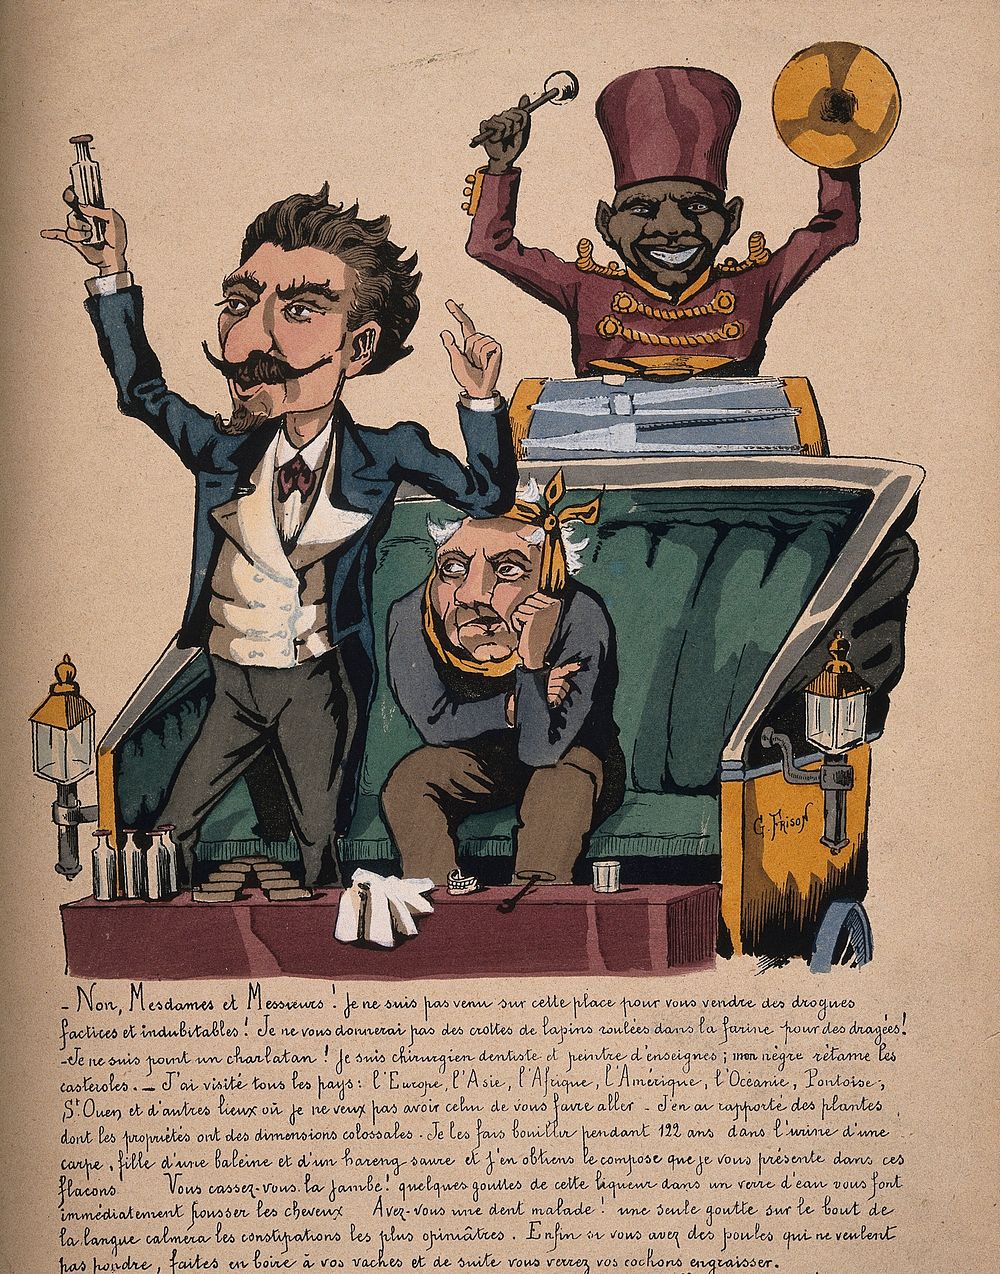 A medicine show; a moustachioed charlatan holds up a phial, a miserable patient sits in the carriage and a black man in…